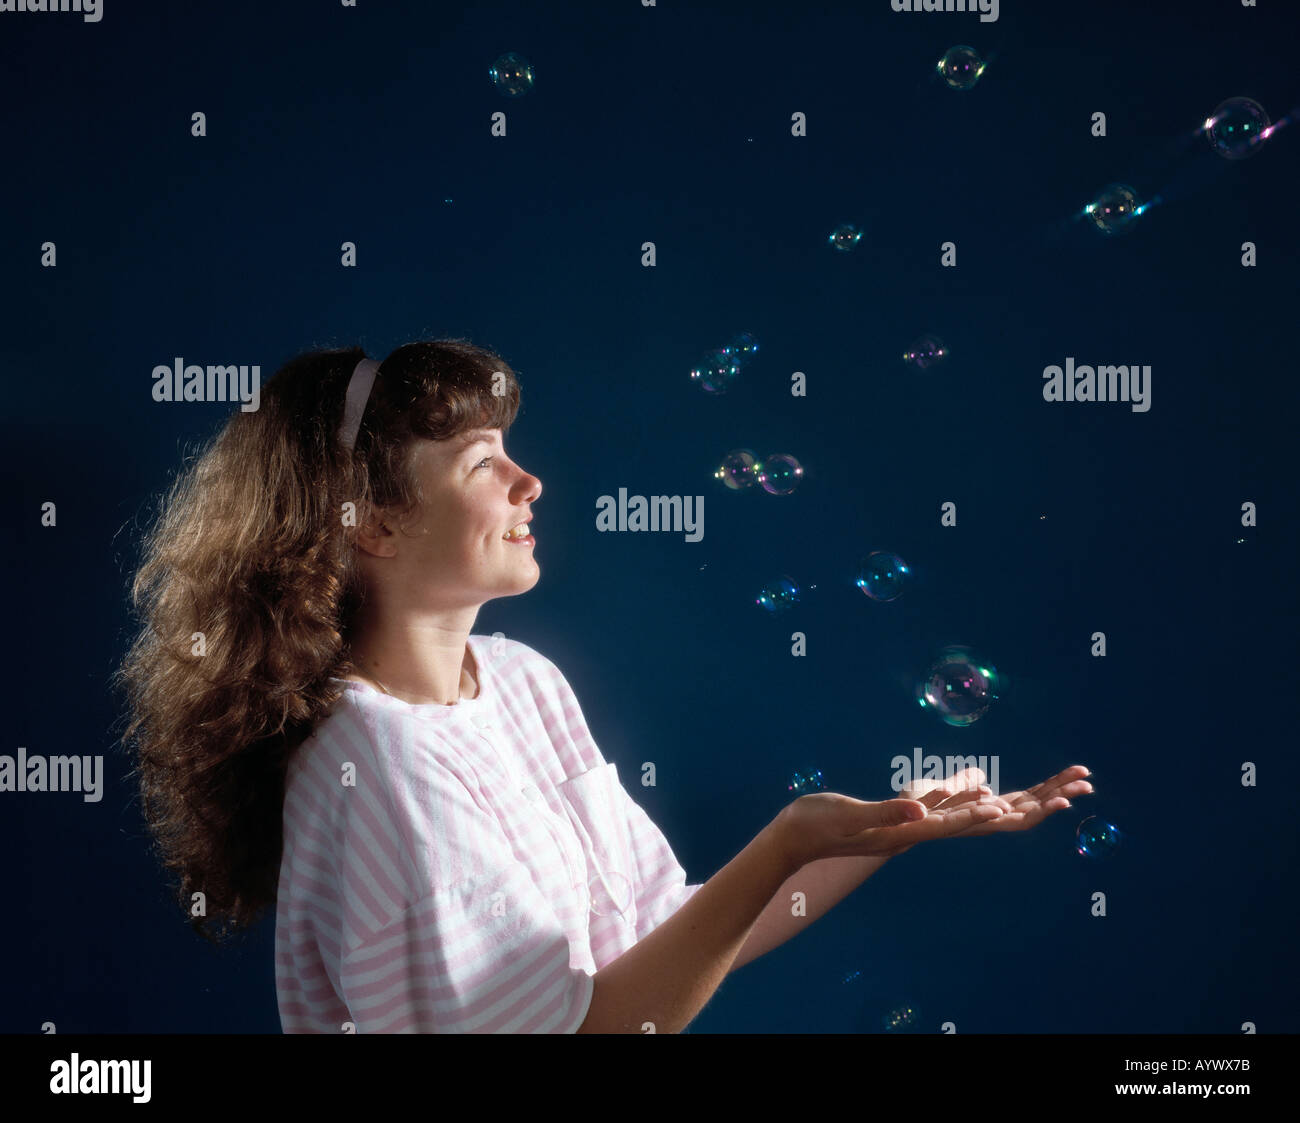 girl, soap bubbles, Babette, people, woman, women, youth, youths, young person, young persons Stock Photo